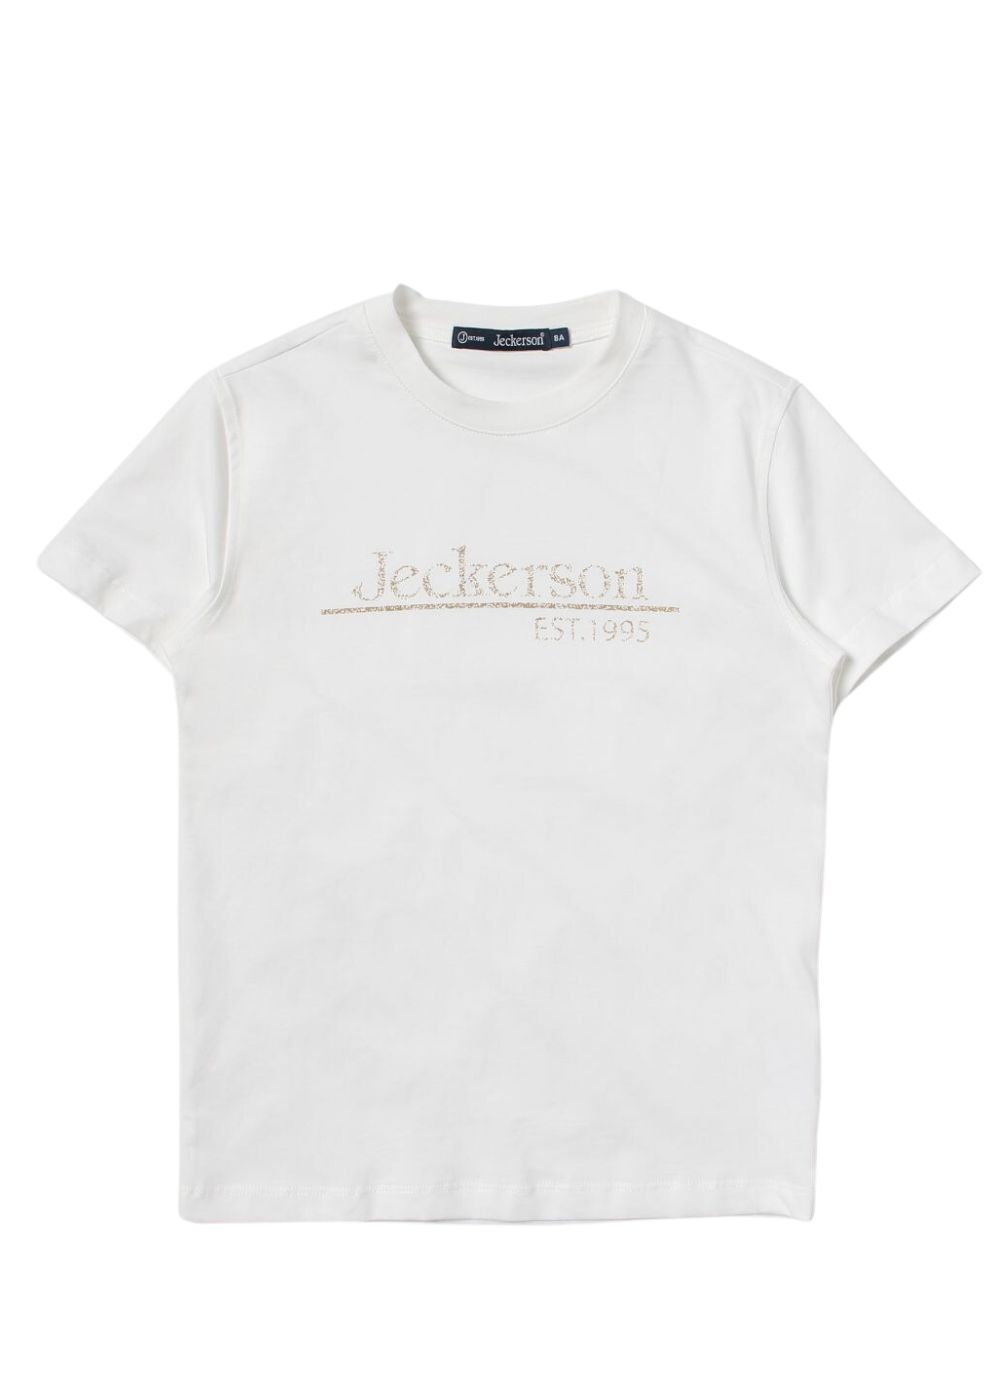 Featured image for “Jeckerson T-shirt Con Logo”